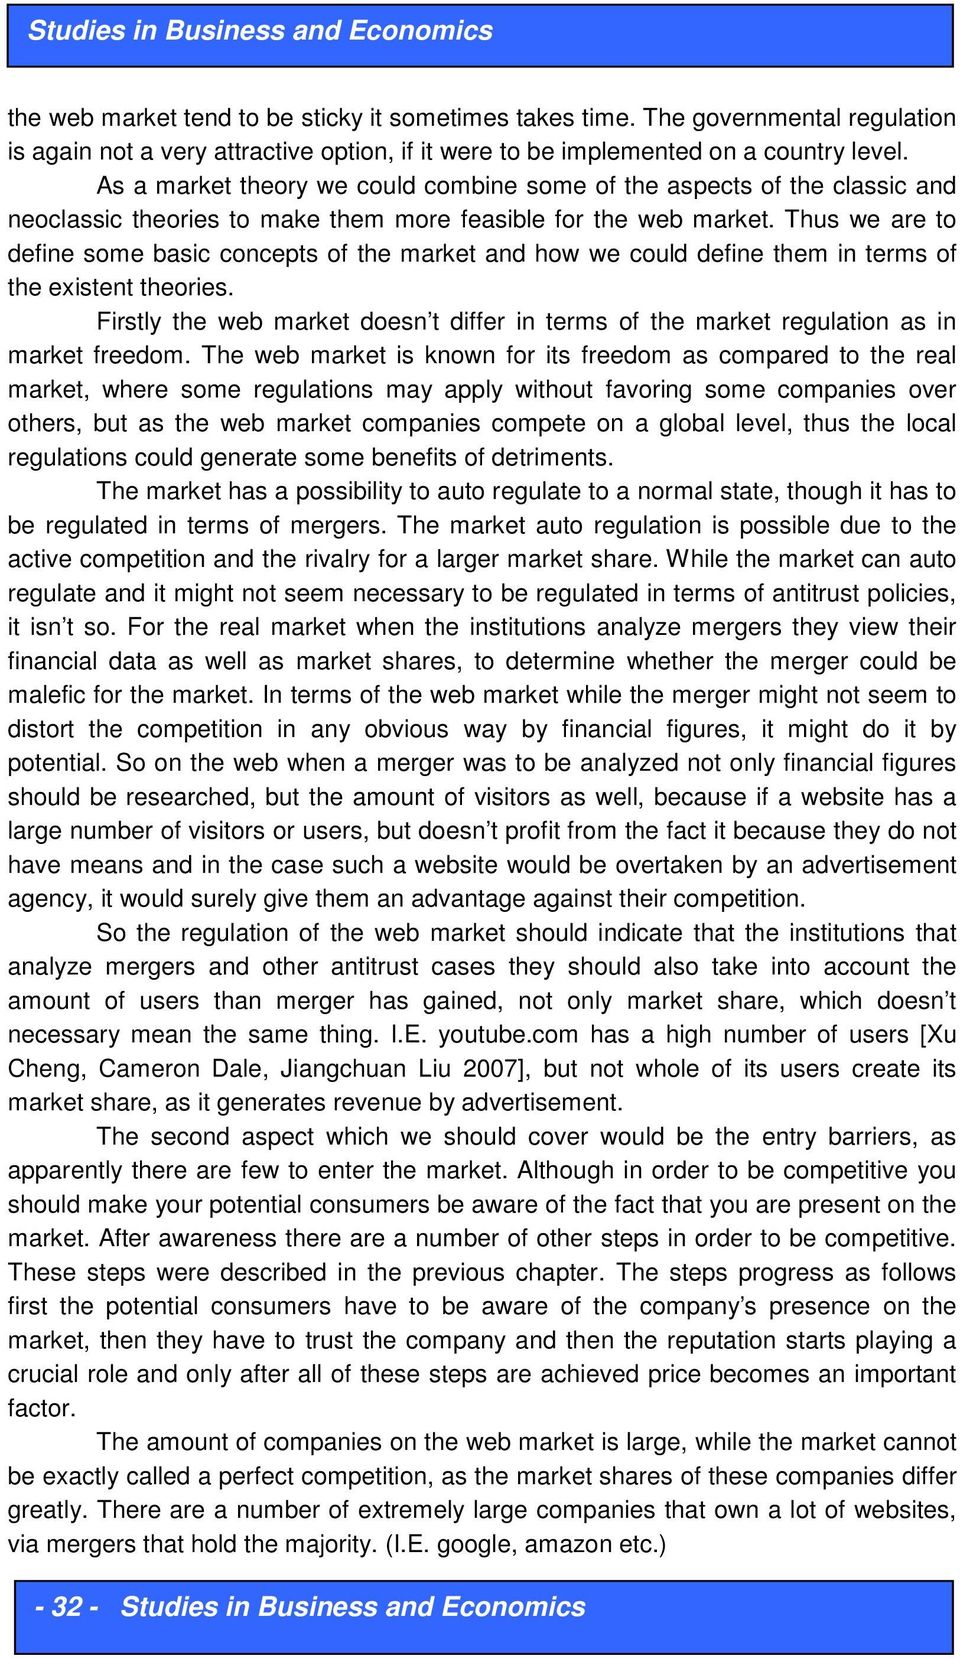 Thus we are to define some basic concepts of the market and how we could define them in terms of the existent theories.